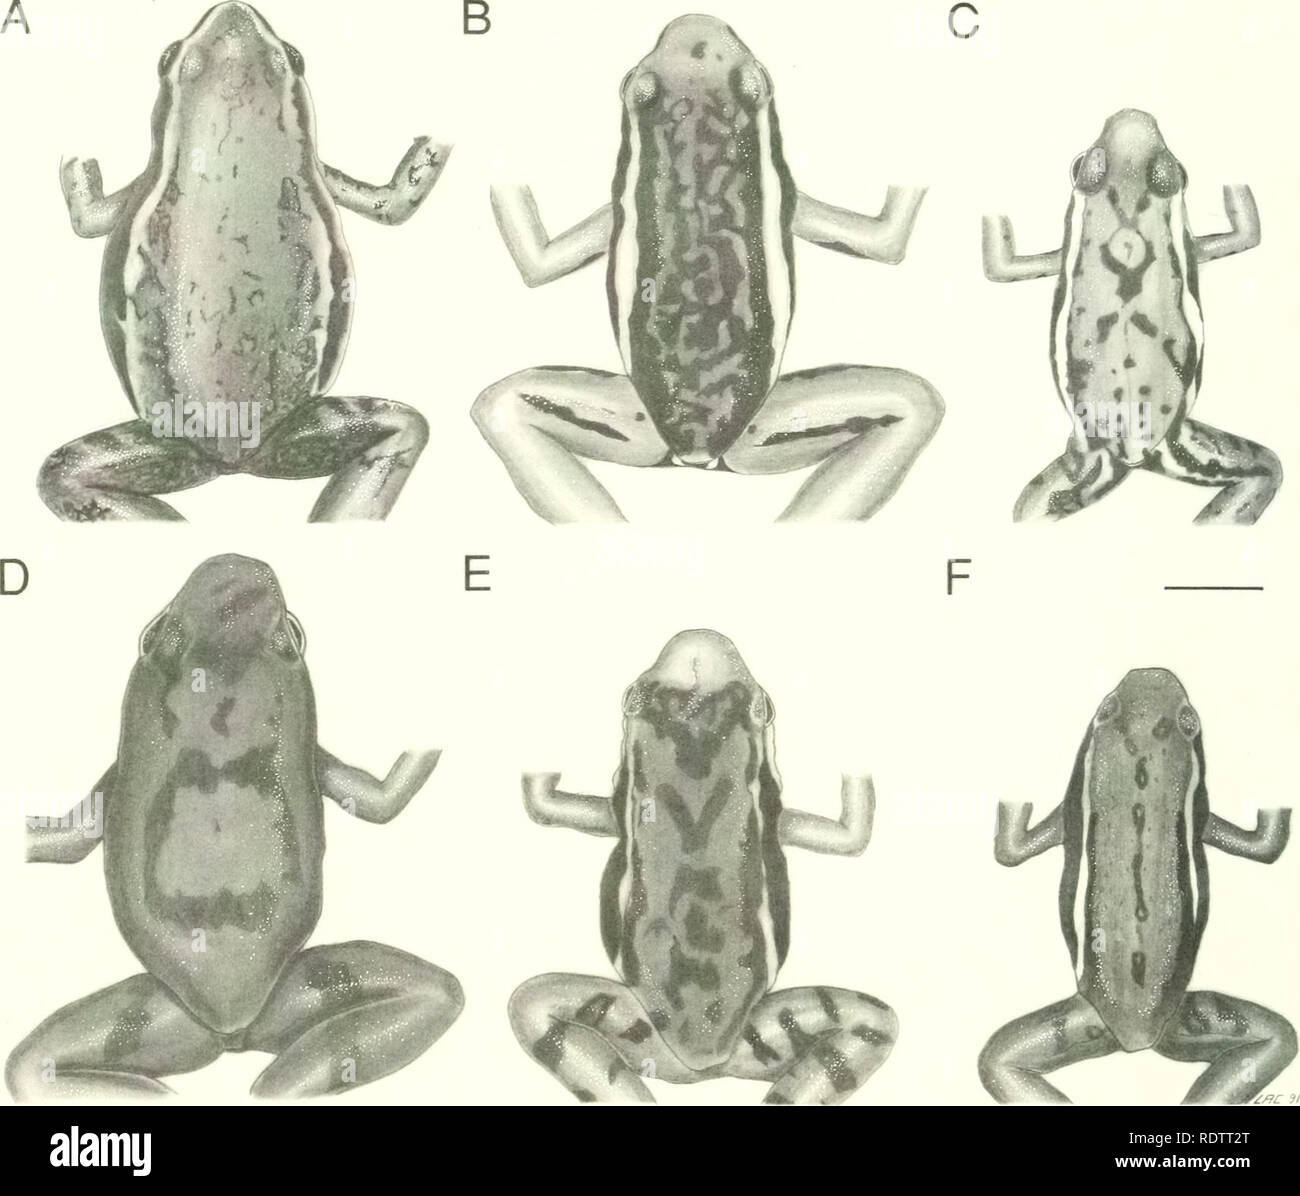 . Ecuadorian frogs of the genus Colostethus (Anura:Dendrobatidae). Colostethus. UNIV. KANSAS NAT. HIST. MUS. MISC. PUBL. NO. 87. Fig. 2. Dorsal color patterns of Colostethus. A. C. jacobuspetersi, QCAZ 1378. B. C. maquipucuna, KU 202882. C. C. machalilla, KU 132330. D. C. chocoensis, MNHG (GO 47). E. C. infraguttatus KU 142401. F. C. anthracinus, KU 120653. Lines equal 5 mm, except in A, in which it is 2 mm. developed in C. bocagei, C. elachyhistus, C. fuliginosus, C. talamancae, C. sauli, and C. shuar. In other species, it is weakly developed. A sigmoid or straight inner tarsal fold is presen Stock Photo